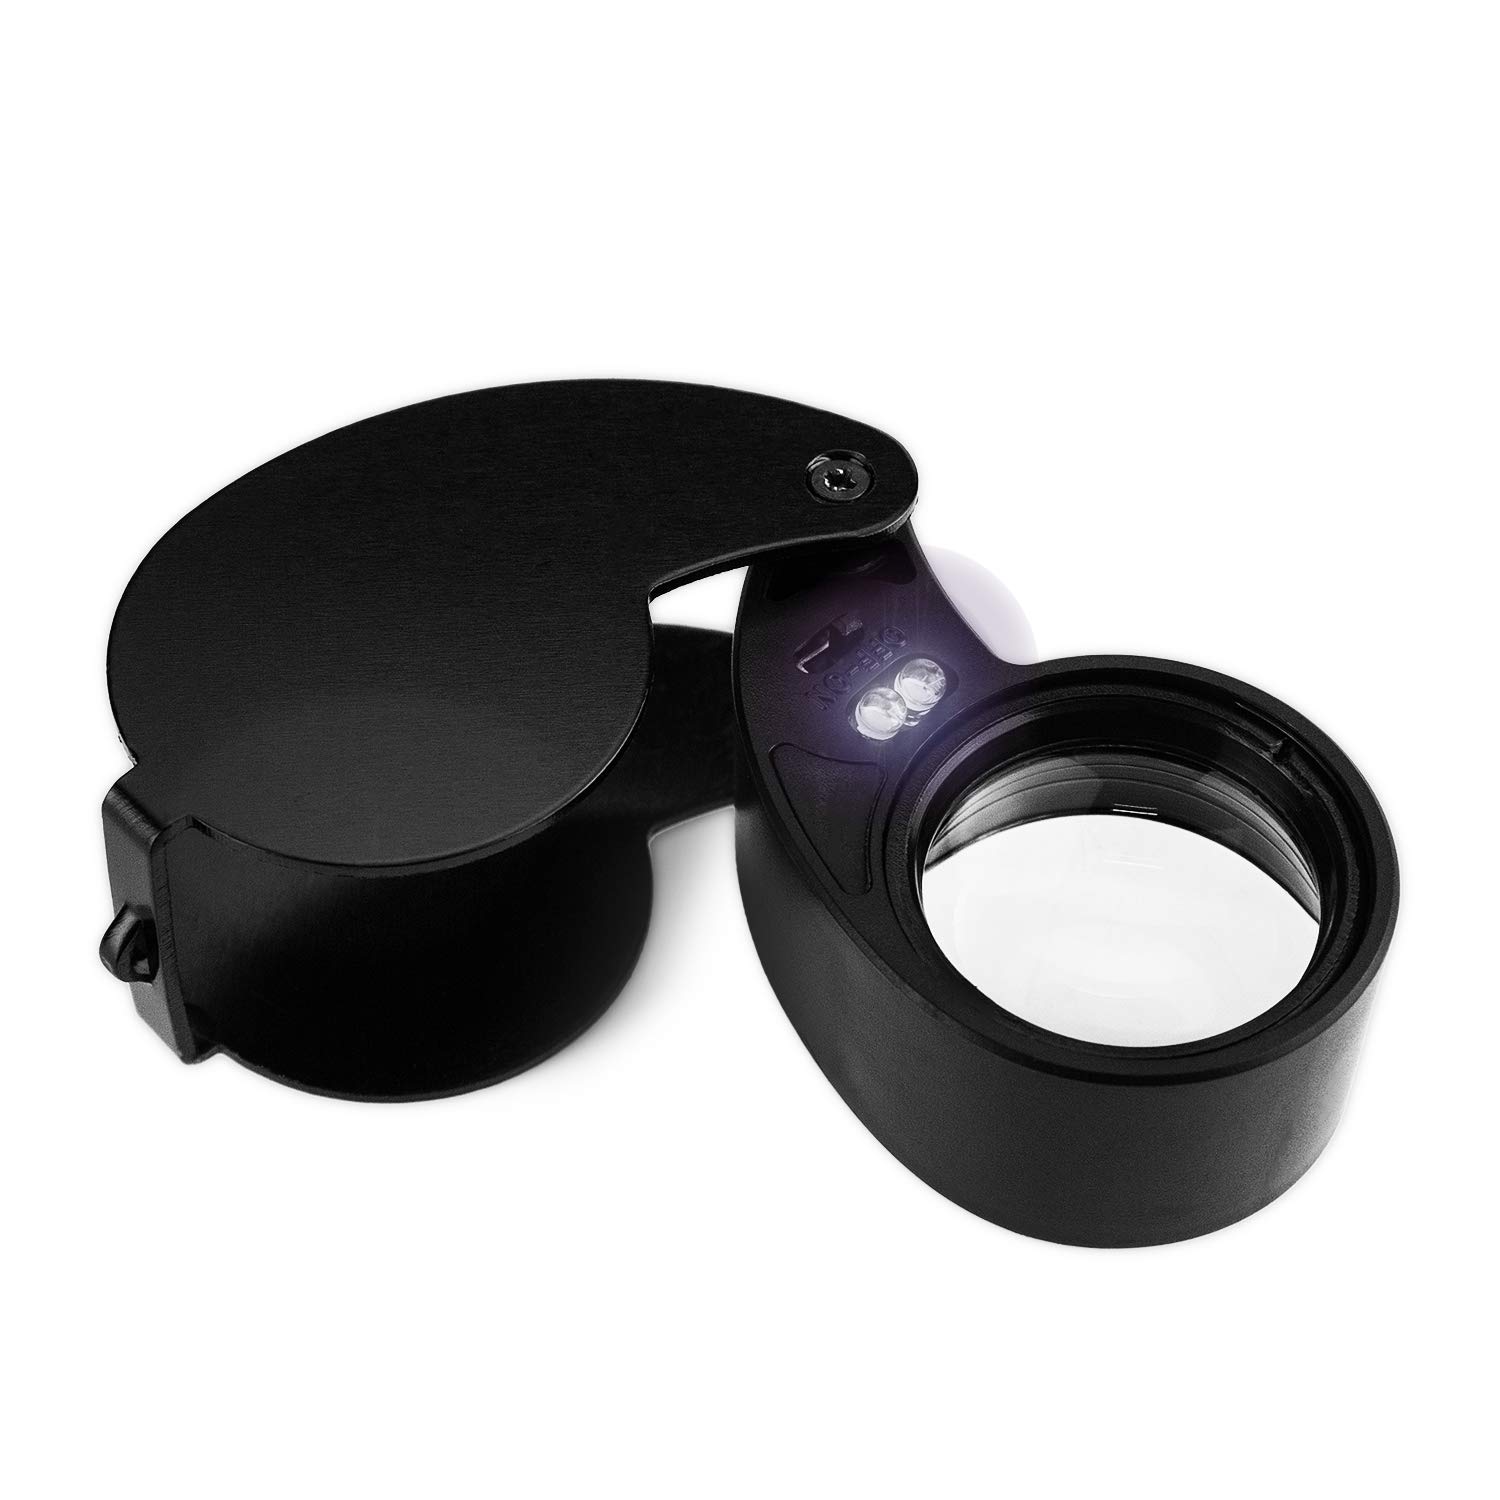 HQMaster 40X Illuminated Jewelers Eye Loupe Jewelry Magnifier with LED  Light Foldable Precision Instrument